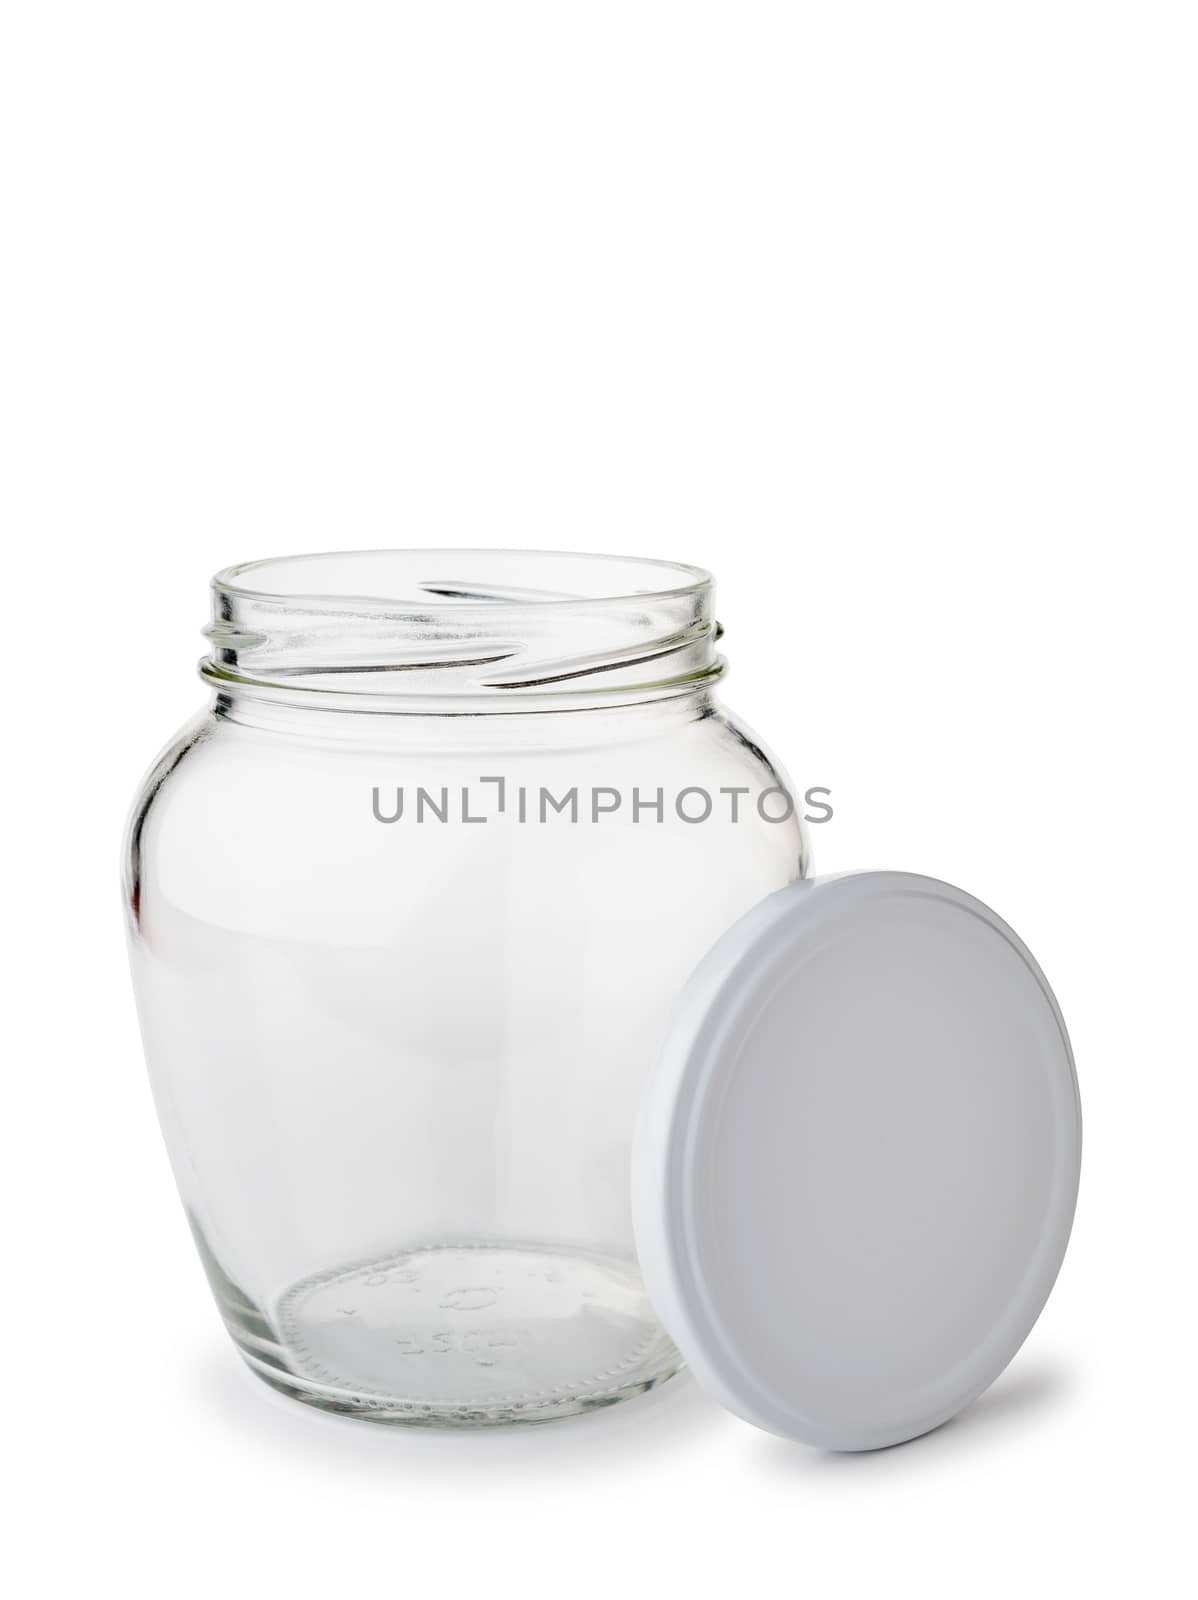 A paunchy open empty glass jar with lid isolated on white background